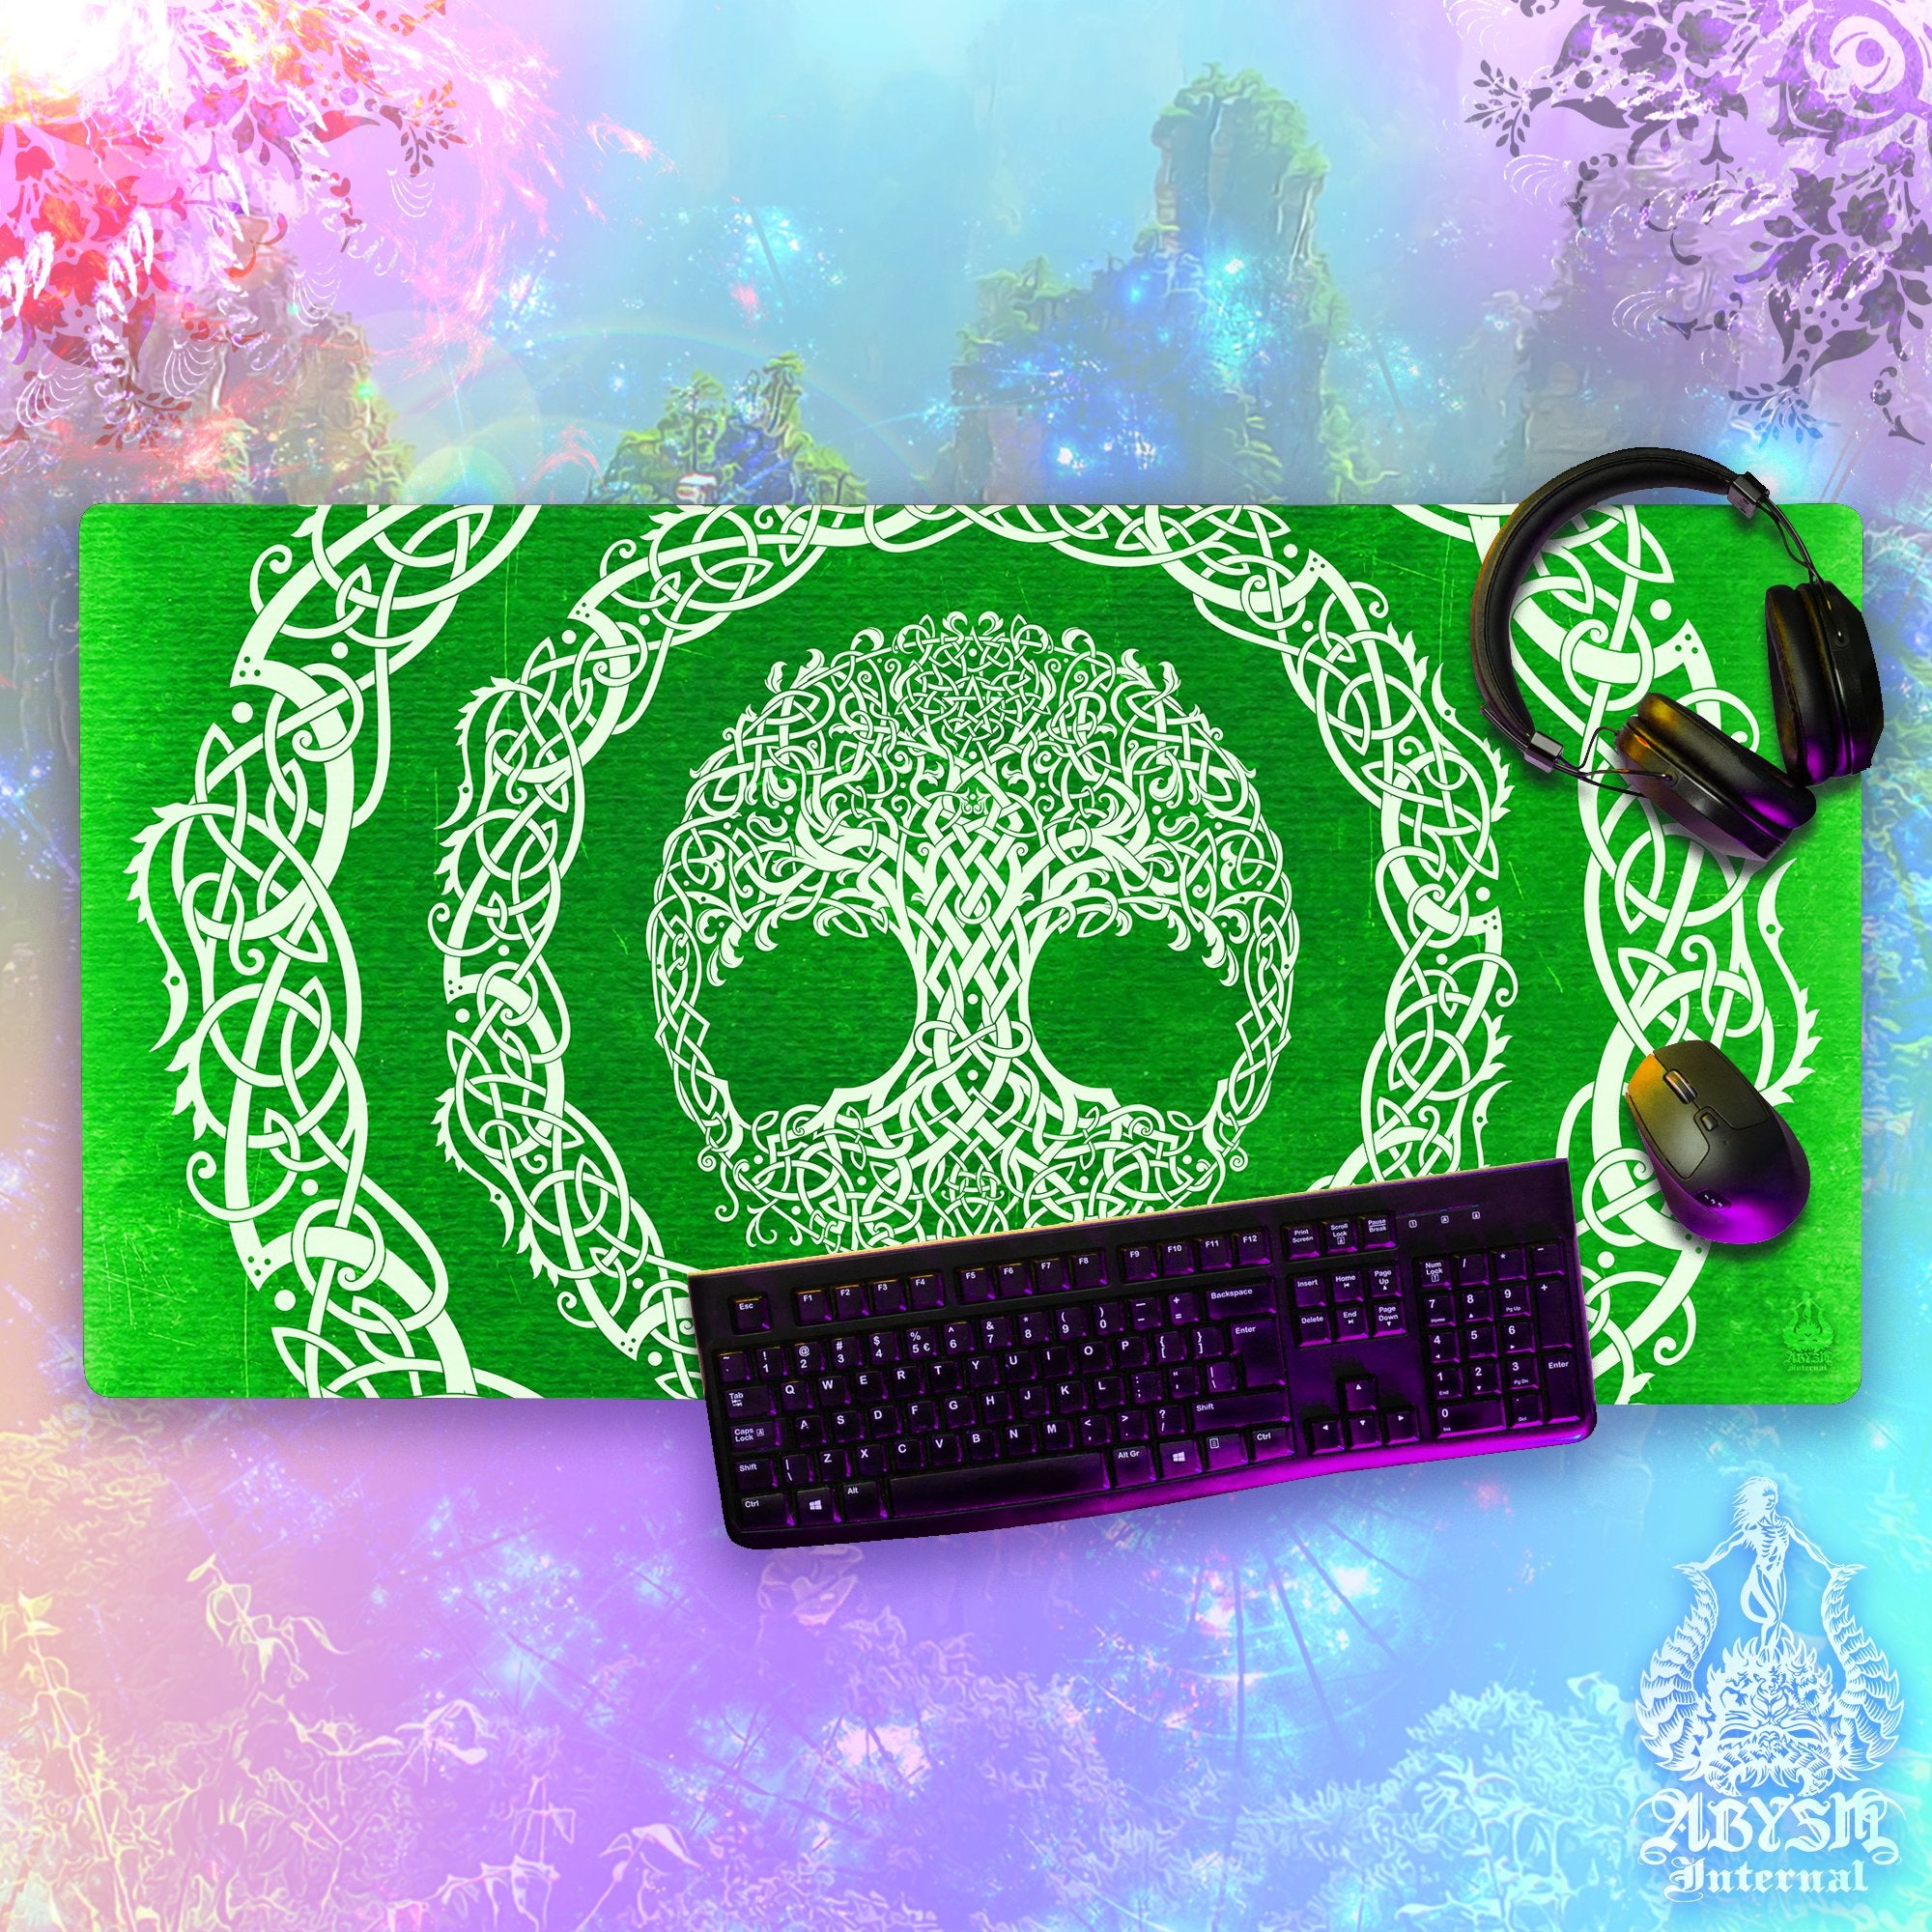 Tree of Life Desk Mat, Celtic Knotwork Gaming Mouse Pad, Wicca Table Protector Cover, Indie Workpad, Boho Art Print - Psy, Green White, Paper, 3 Colors - Abysm Internal